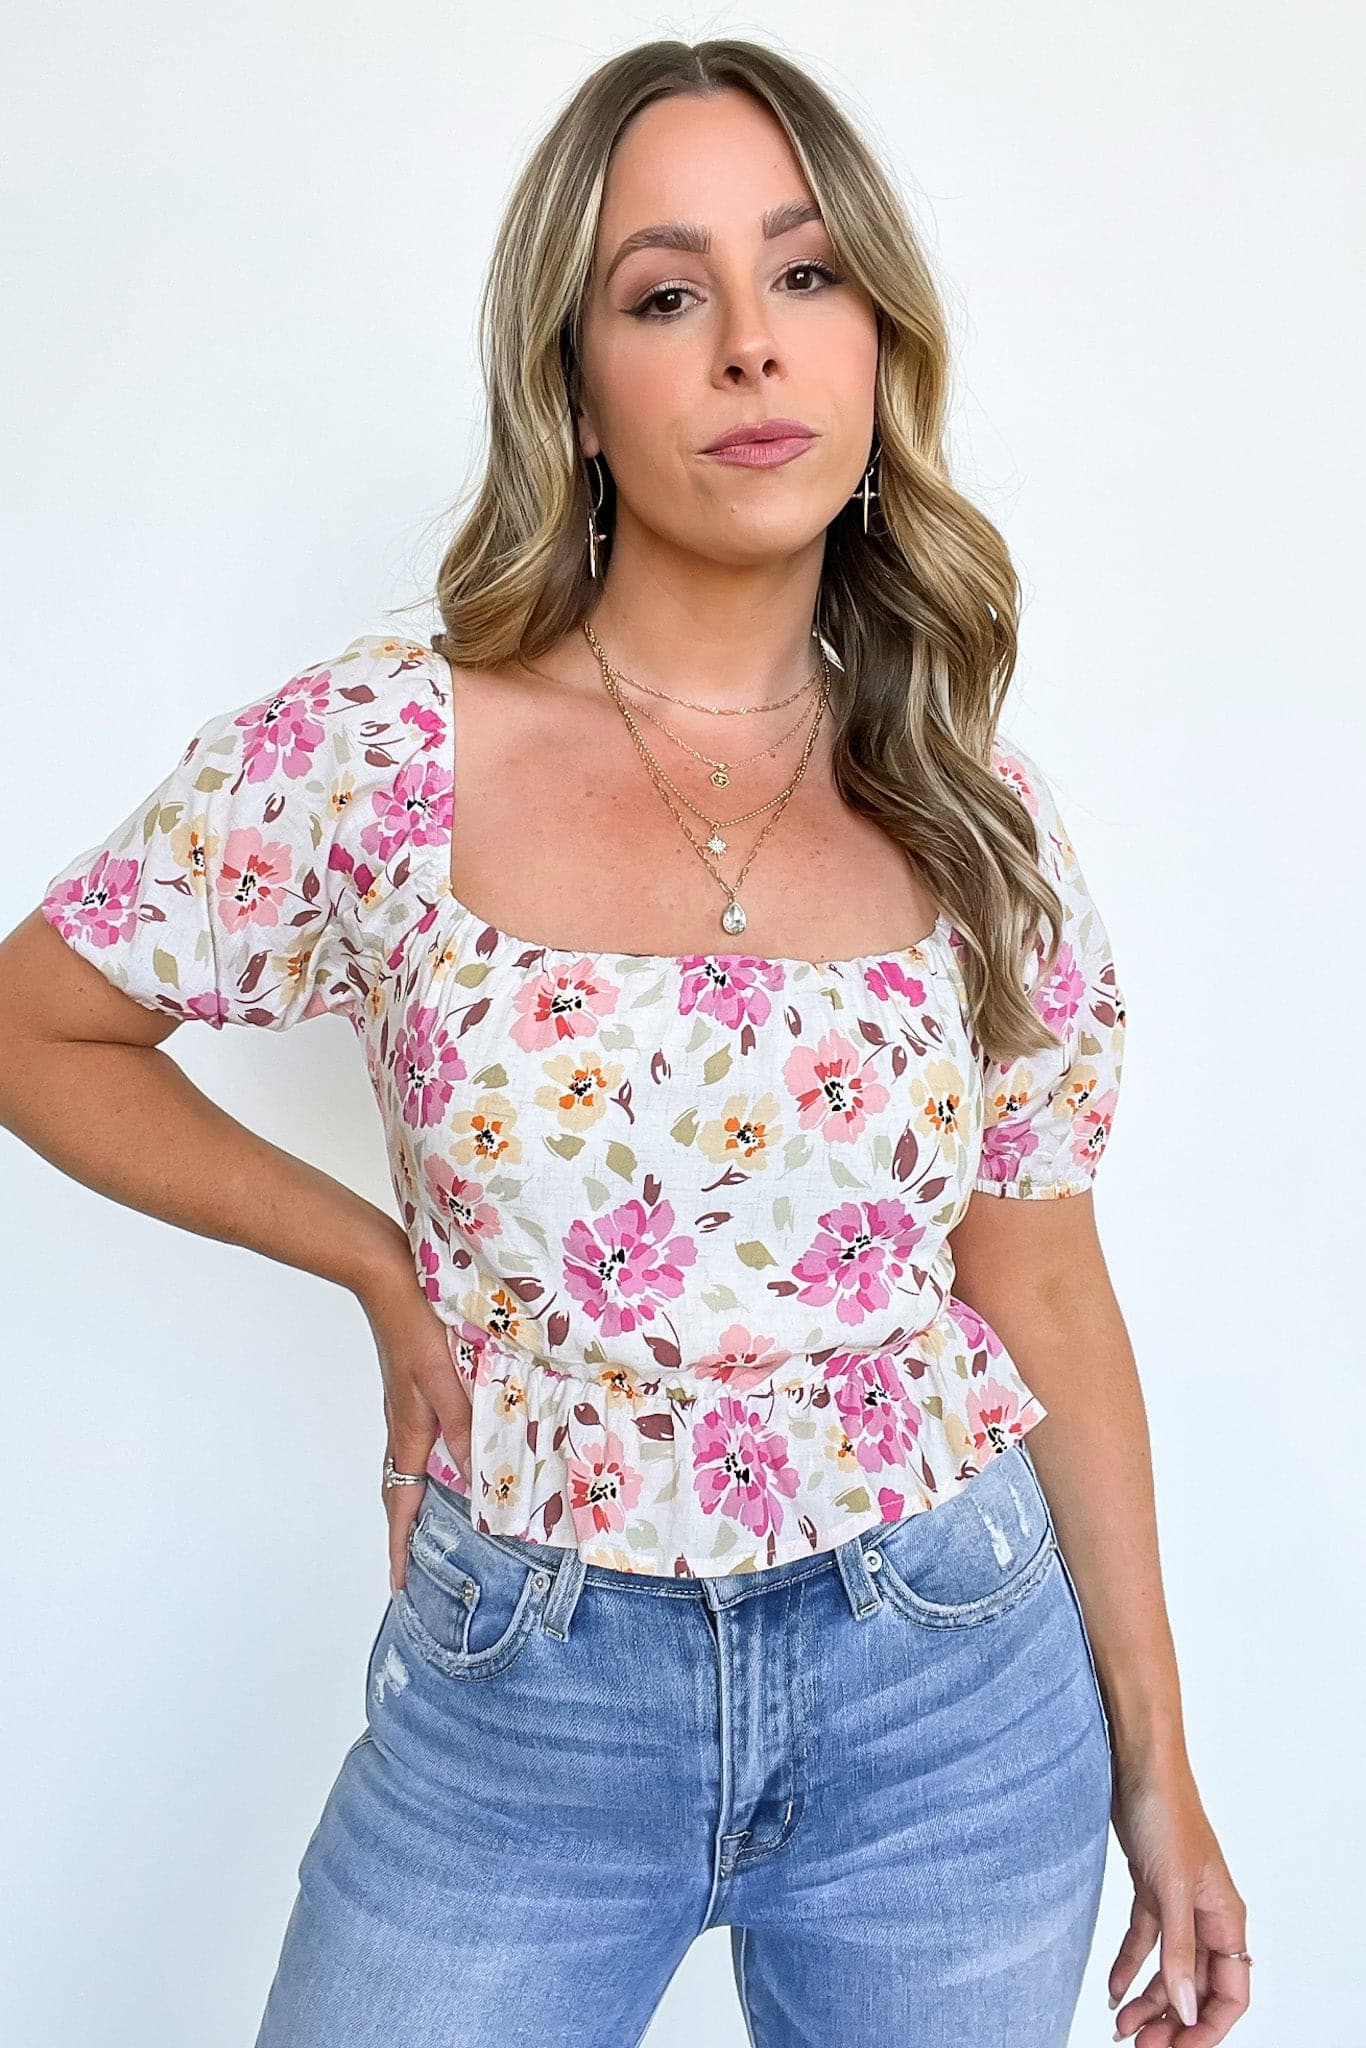  Sunshine Dreaming Floral Peplum Smocked Top - FINAL SALE - Madison and Mallory